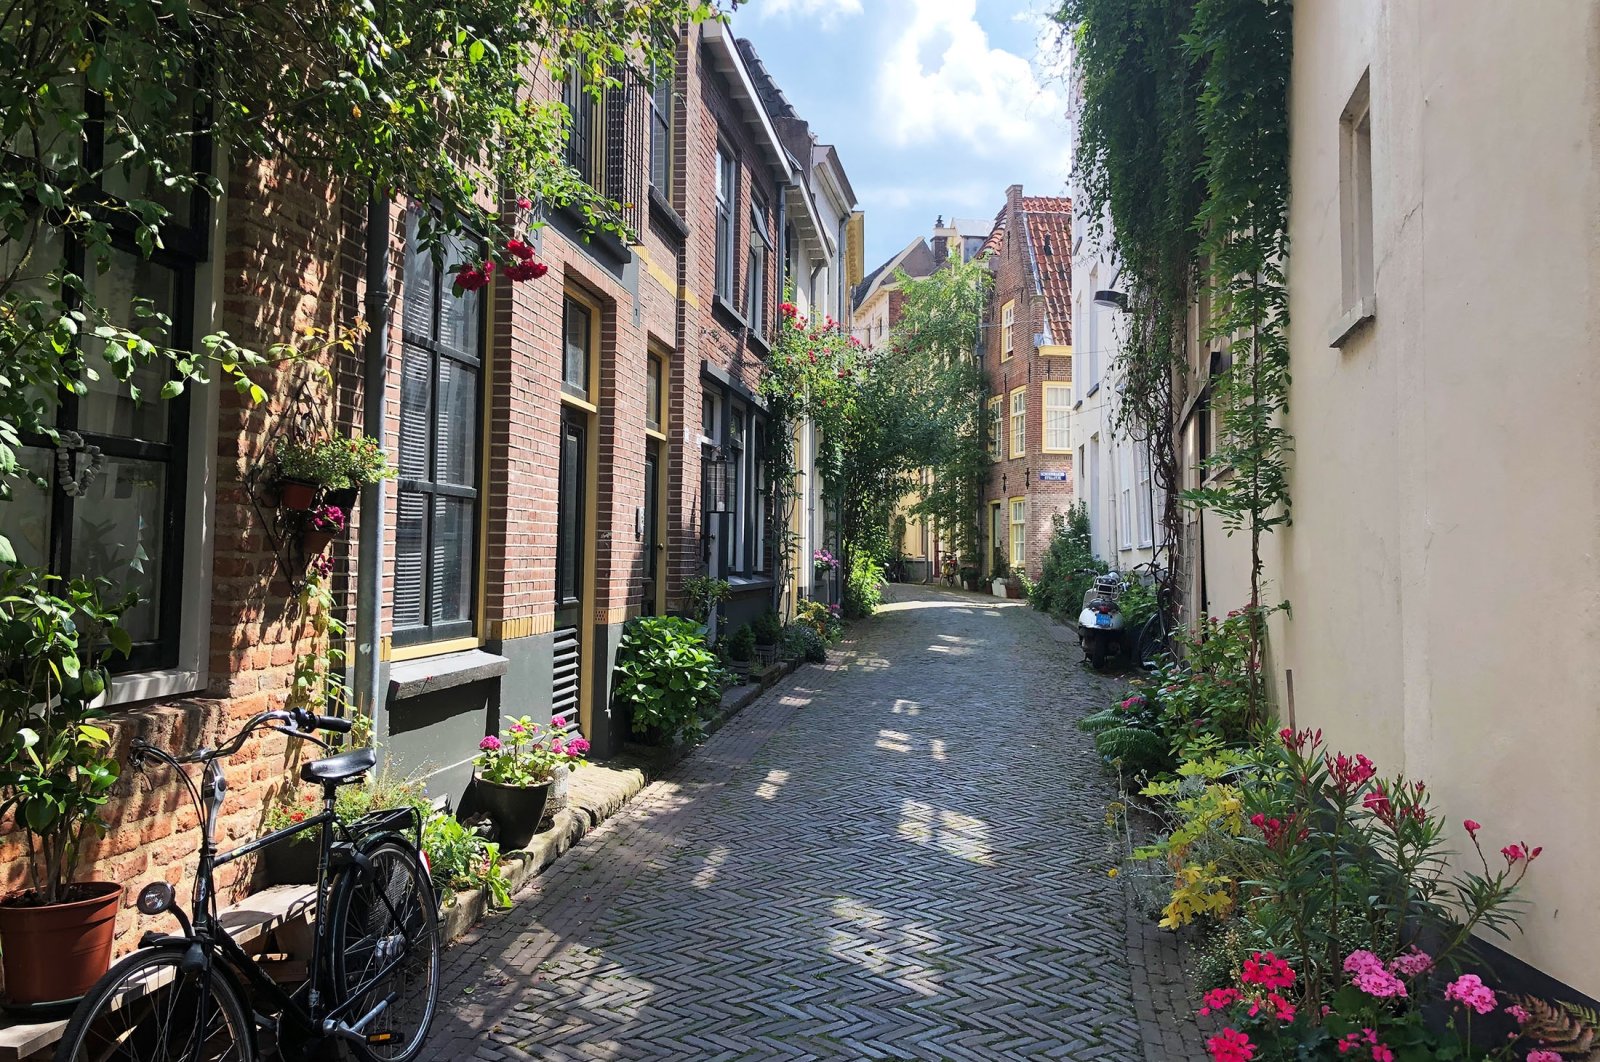 Charming alleys abound in the eastern Dutch city of Zutphen, the Netherlands. (dpa Photo)